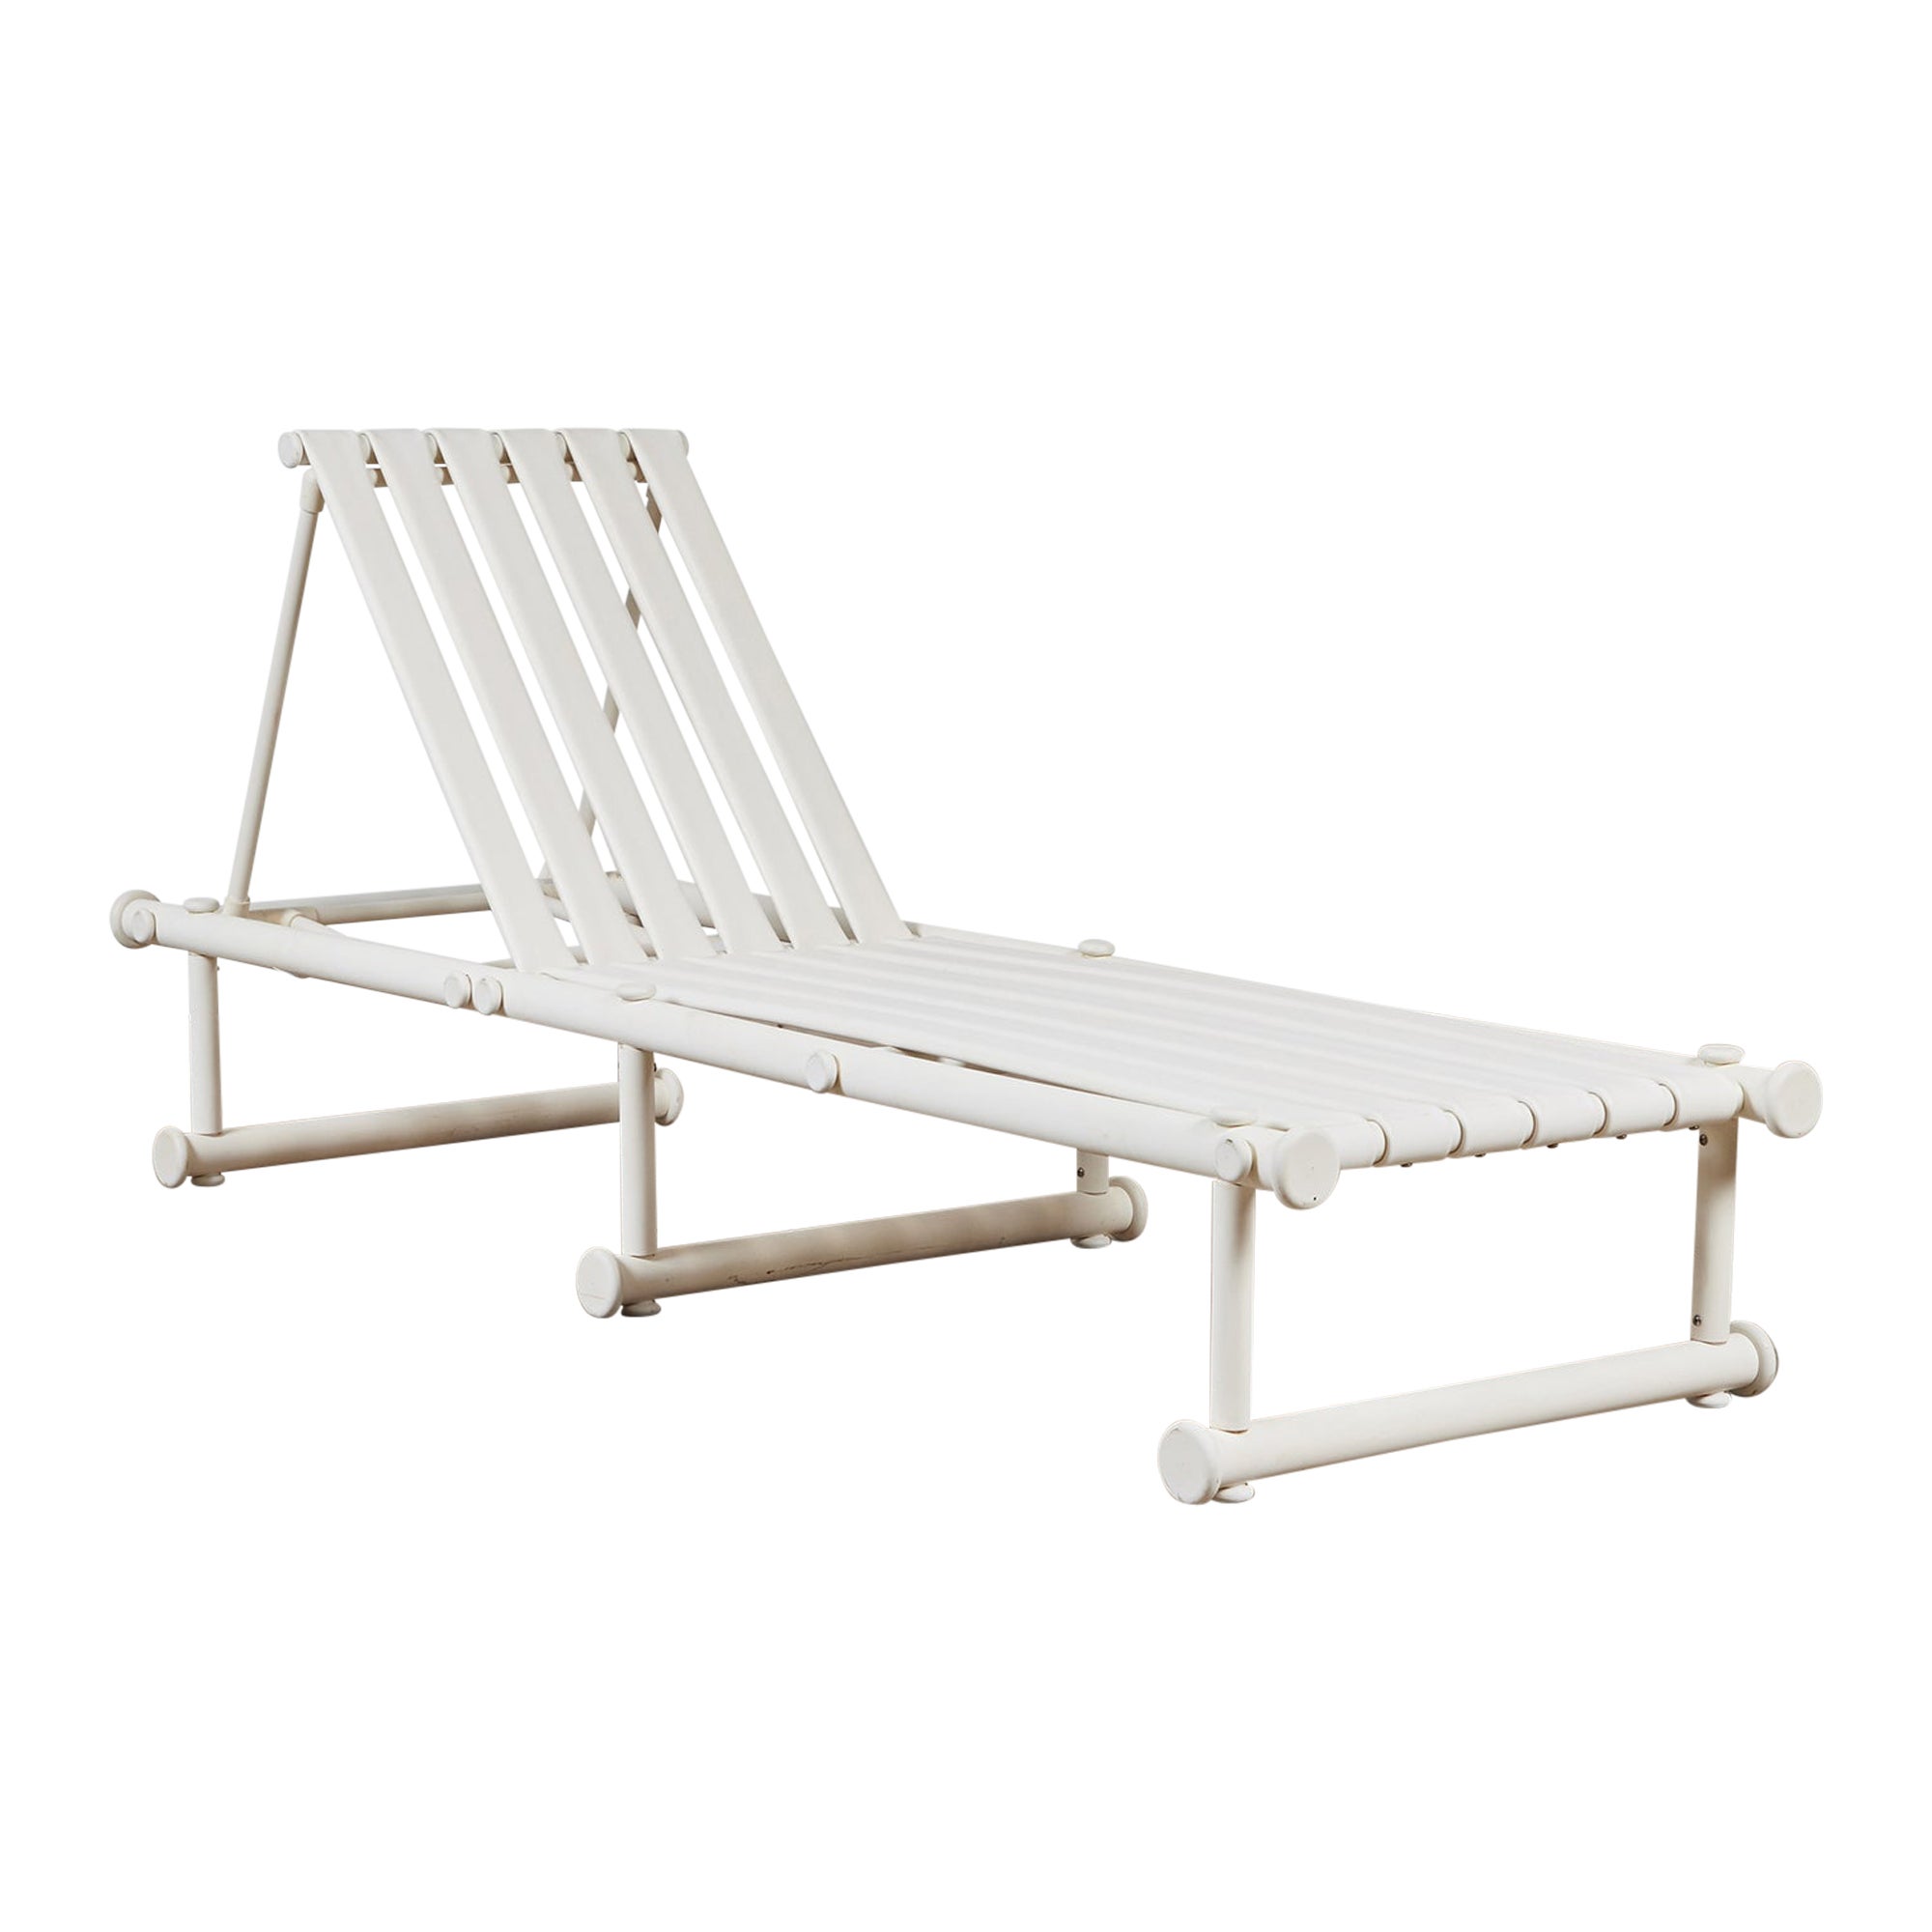 Jerry Johnson Outdoor "Idyllwild" Chaise Lounge Chair